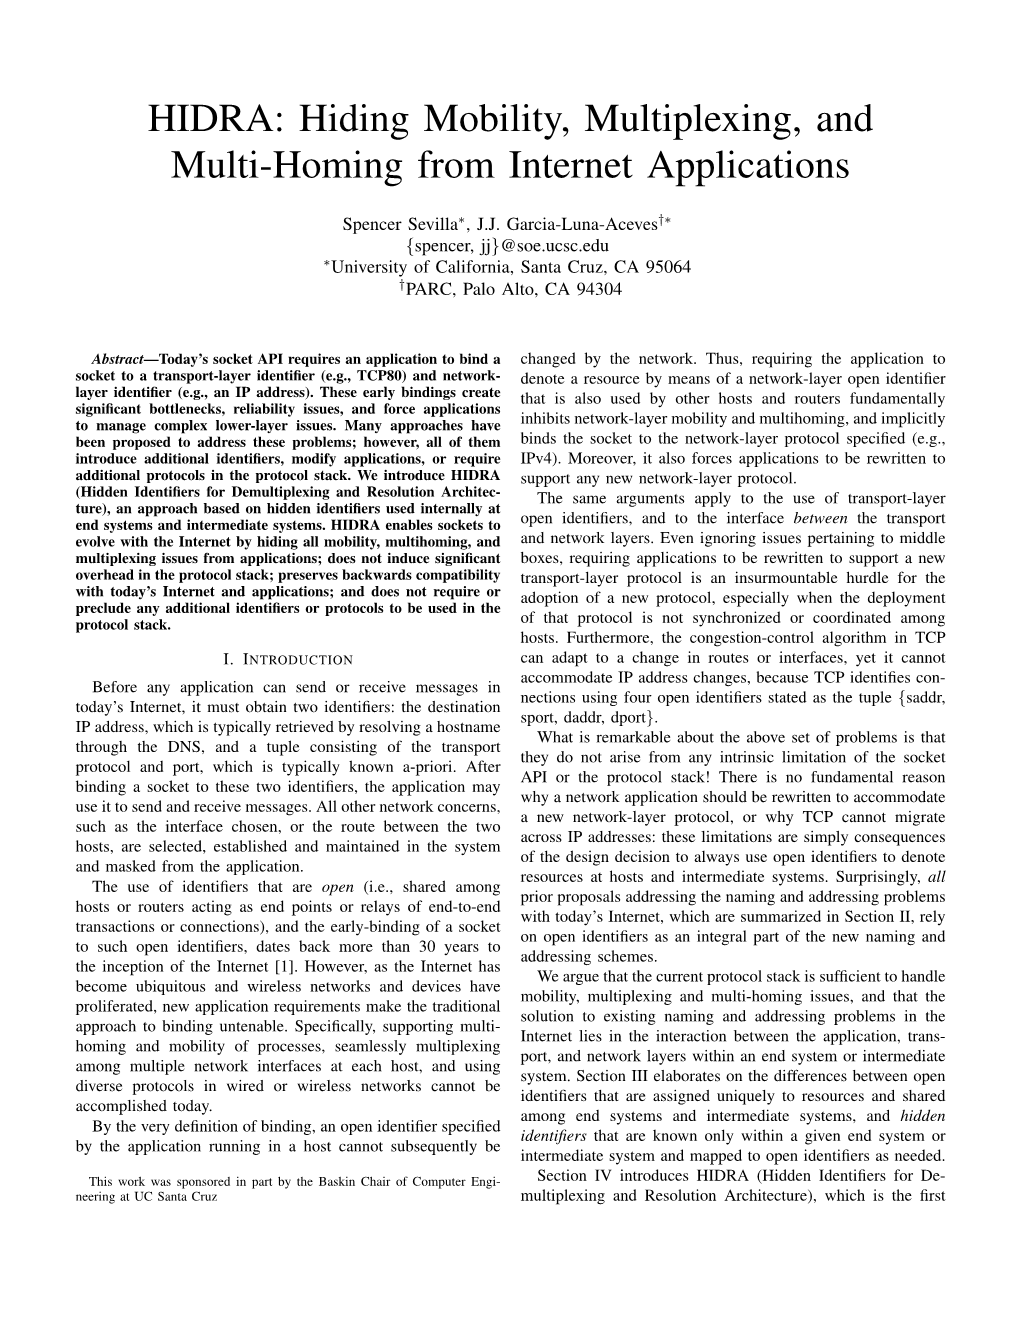 Hiding Mobility, Multiplexing, and Multi-Homing from Internet Applications